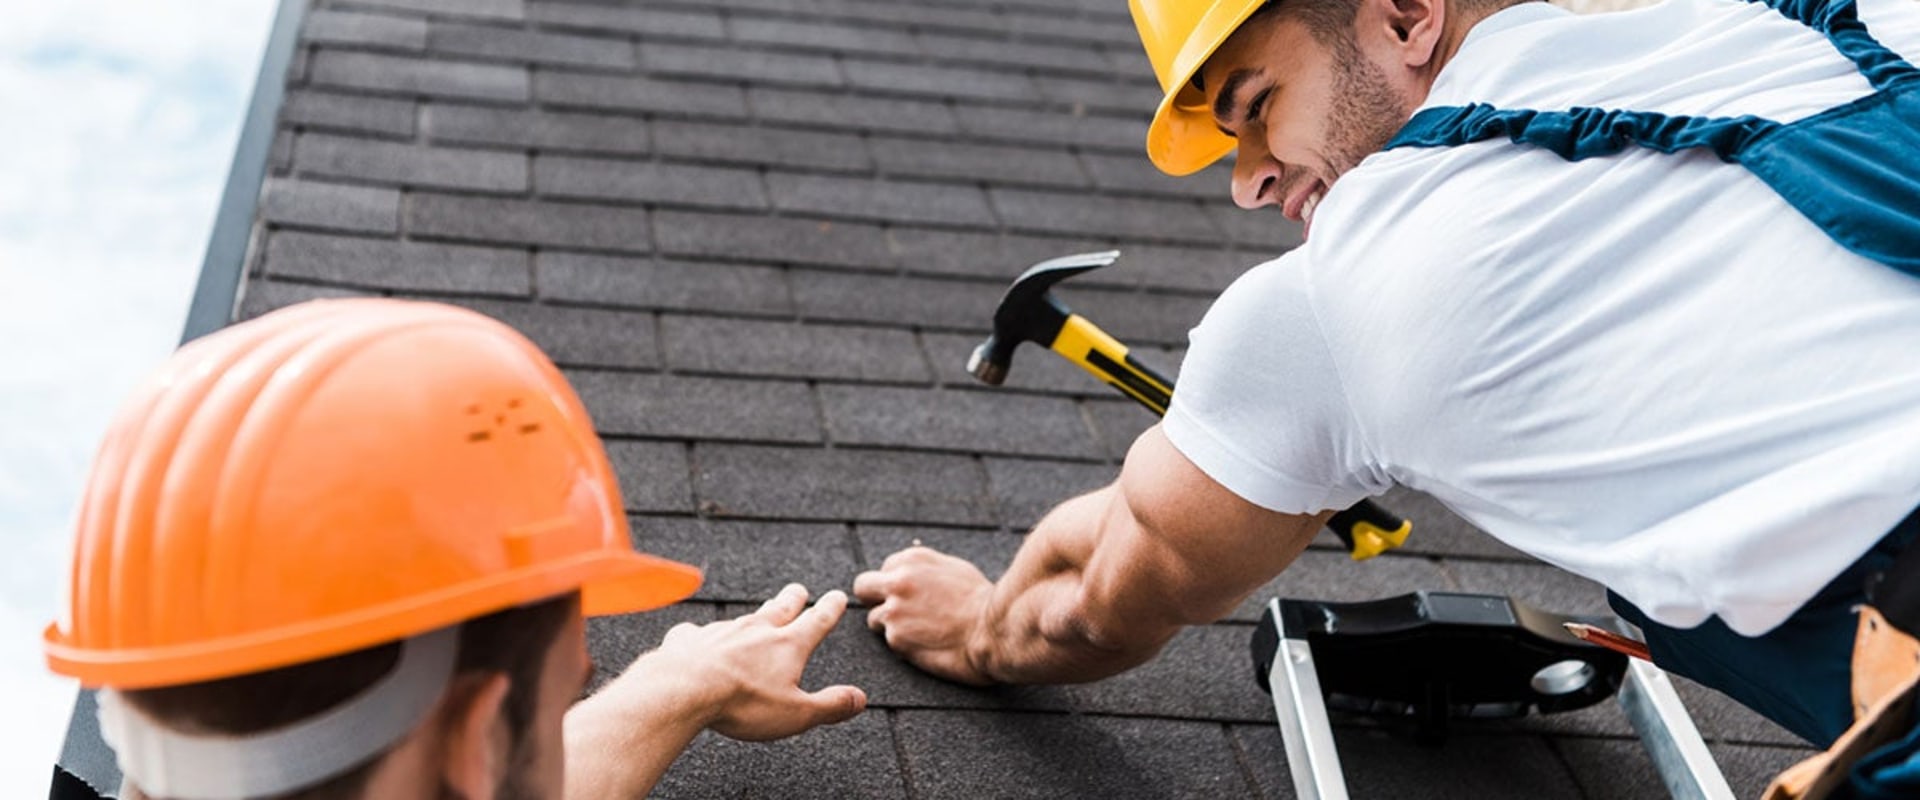 How To Handle Emergency Roof Repairs In Columbia, MD Following A Mold Inspection